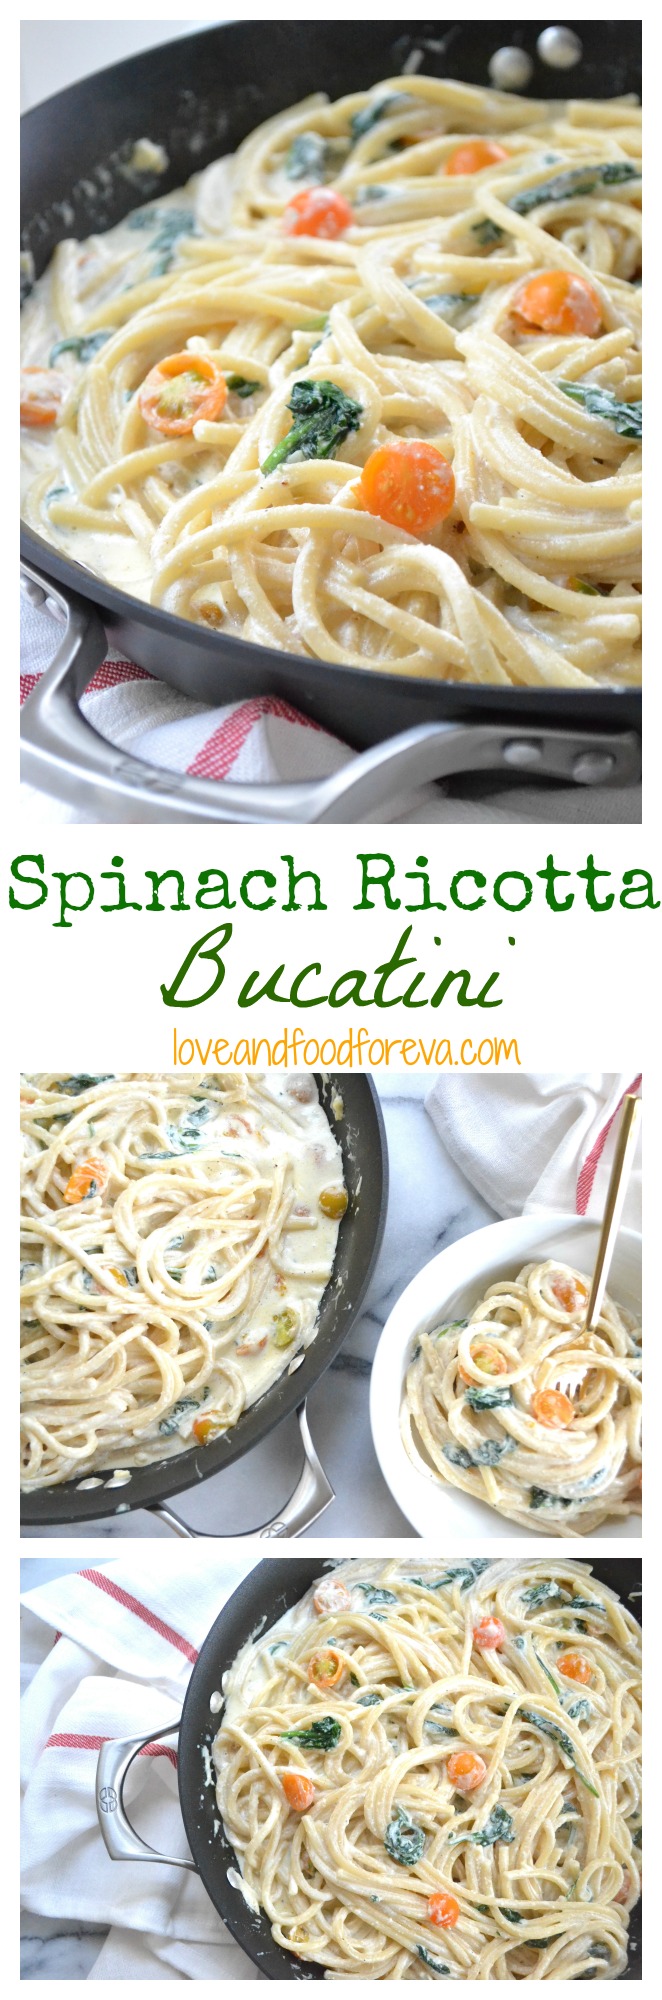 Spinach Ricotta Bucatini - a quick and satisfying dinner everyone will love!